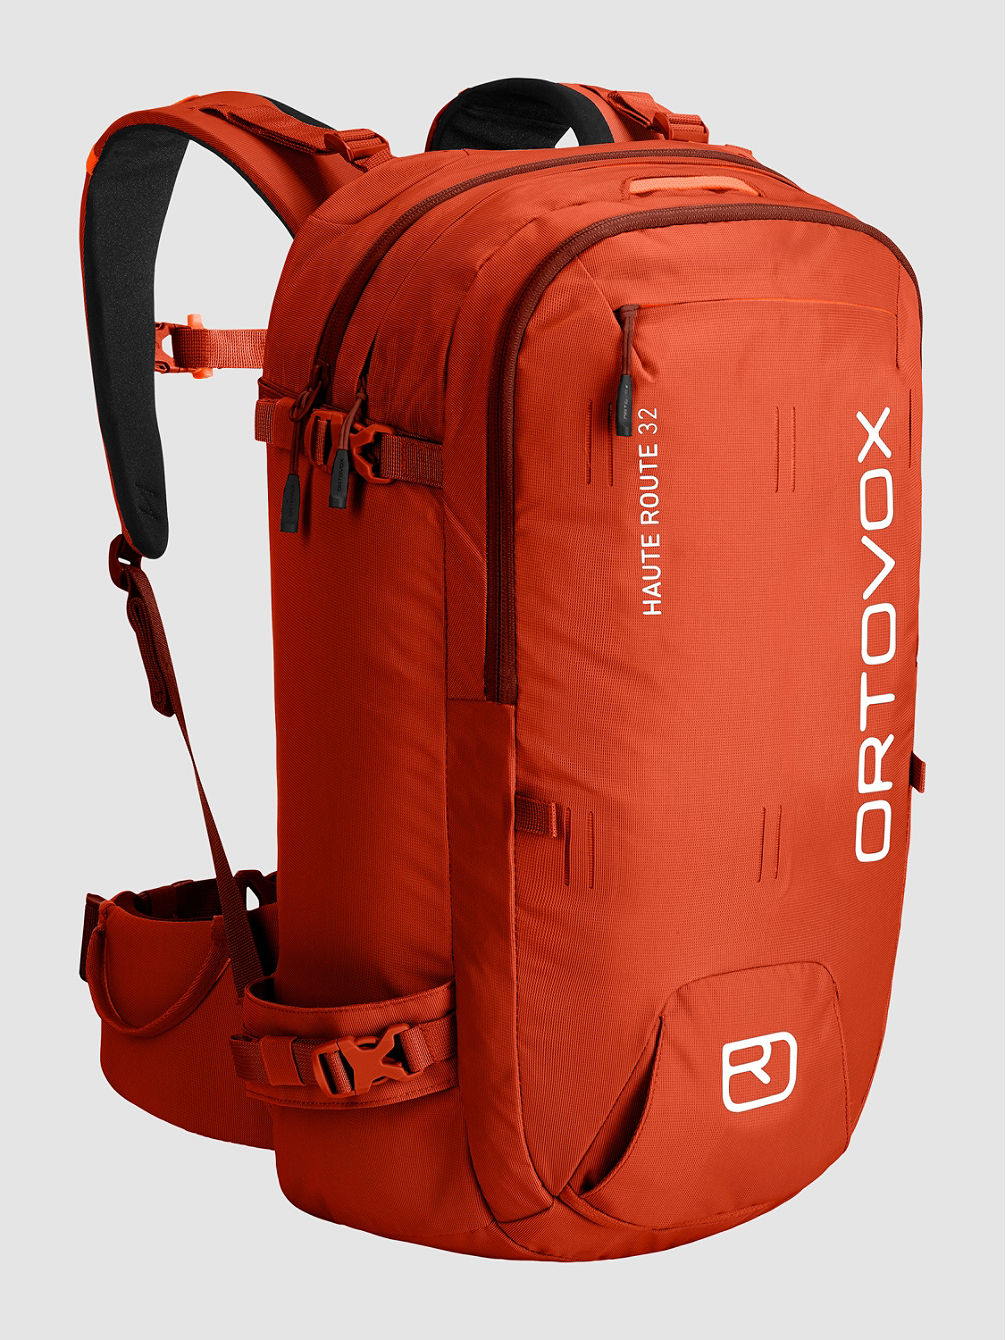 Haute Route 32 Backpack